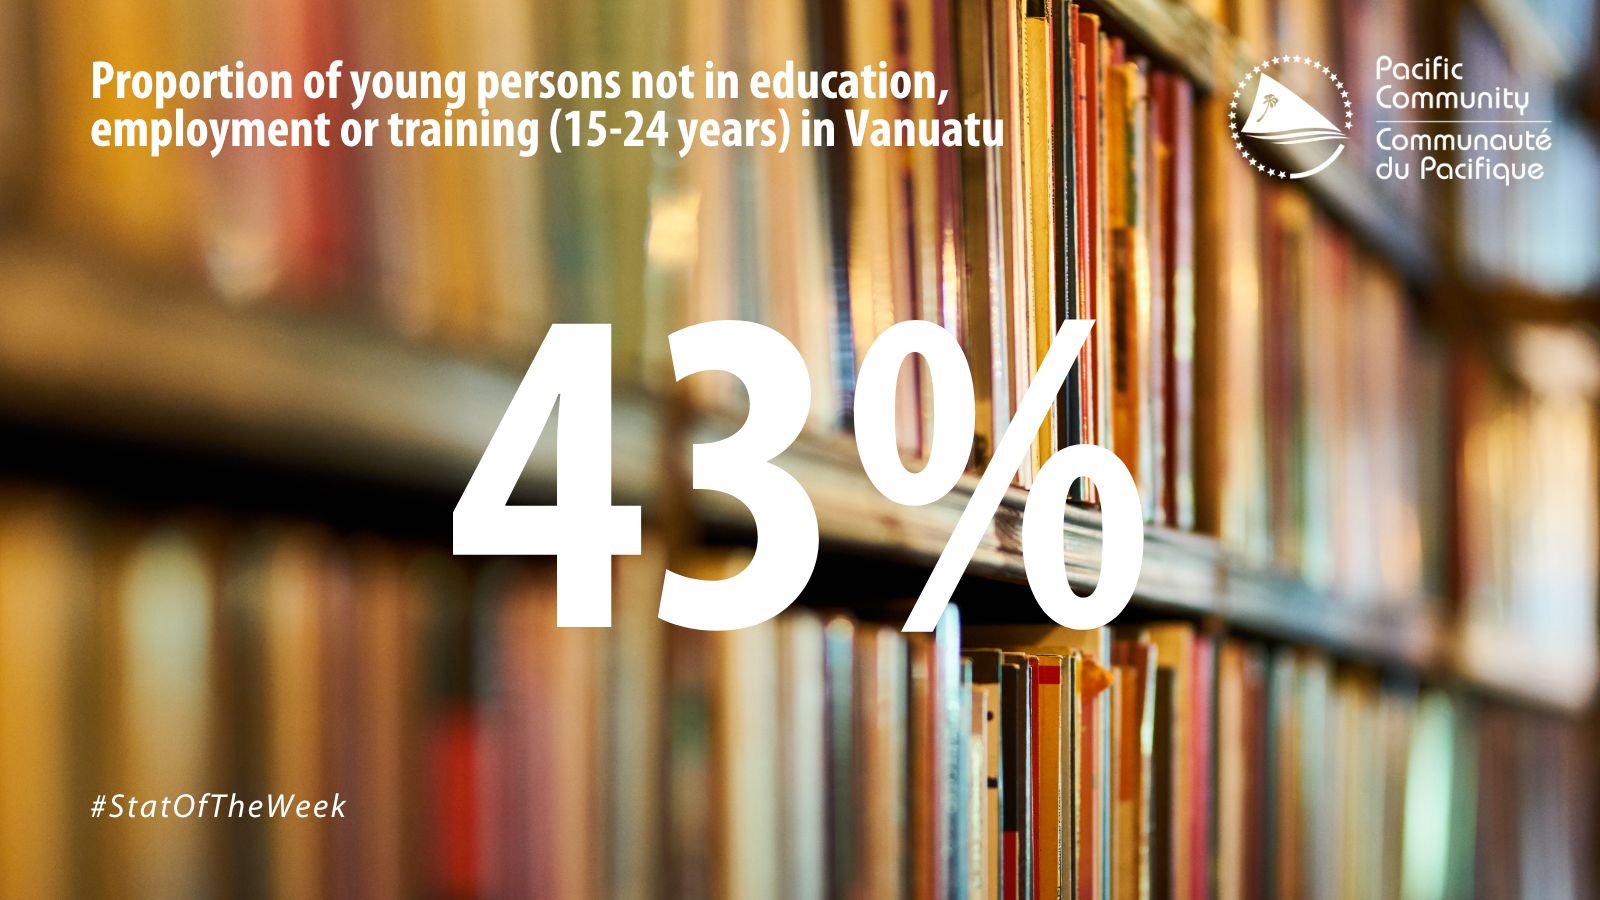 Stat of the week : proportion of young persons not in education, employment or training in Vanuatu.